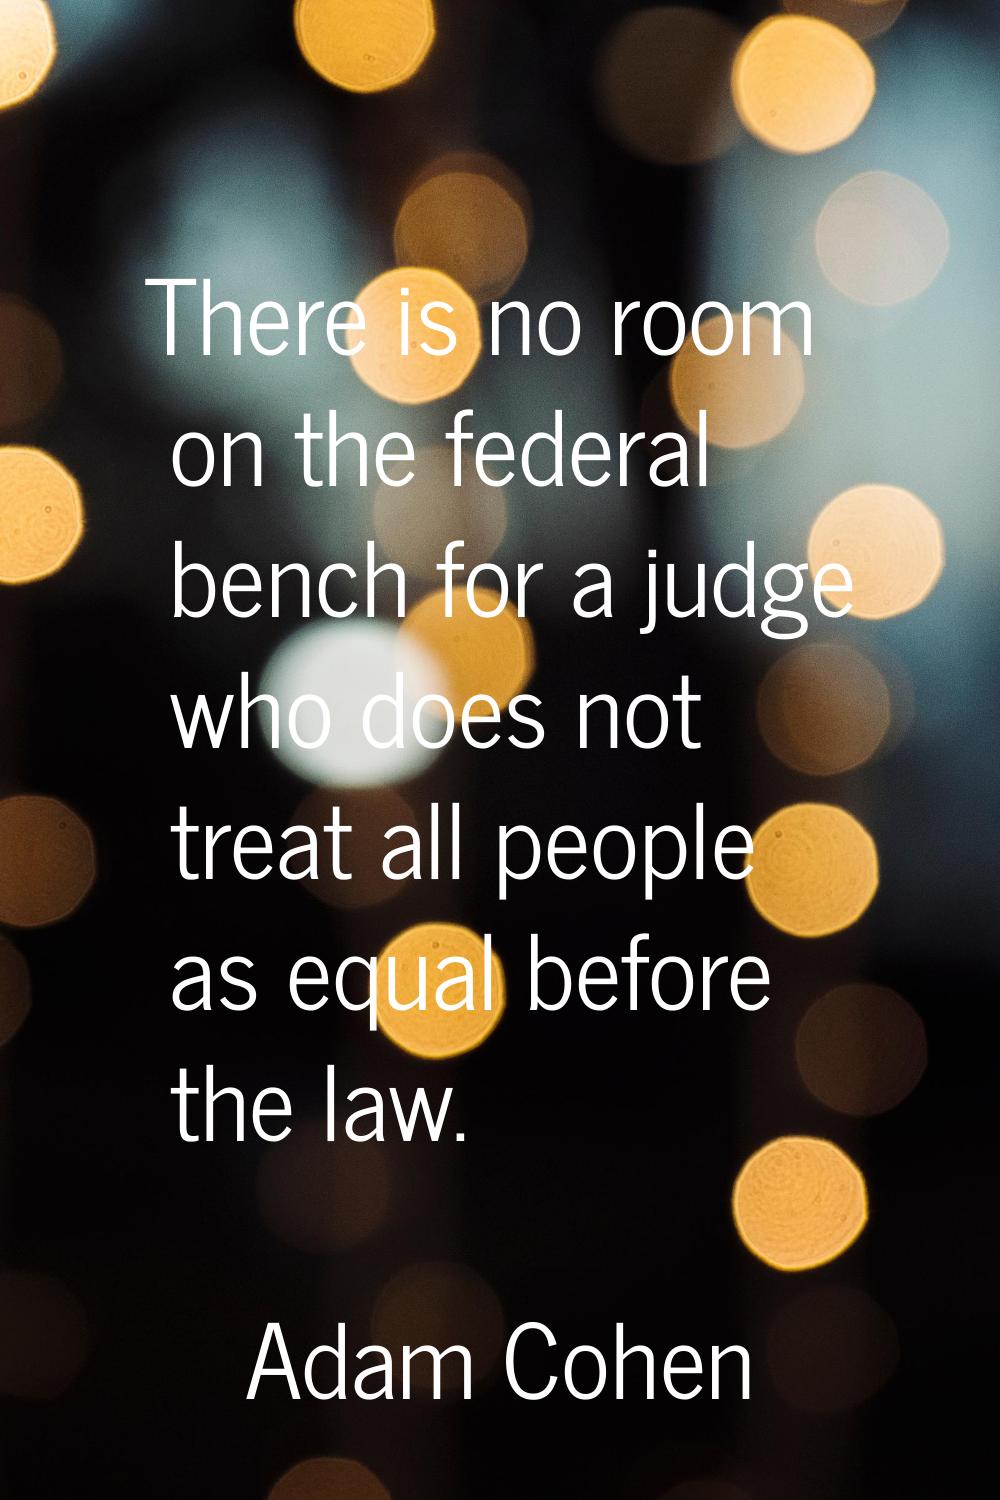 There is no room on the federal bench for a judge who does not treat all people as equal before the